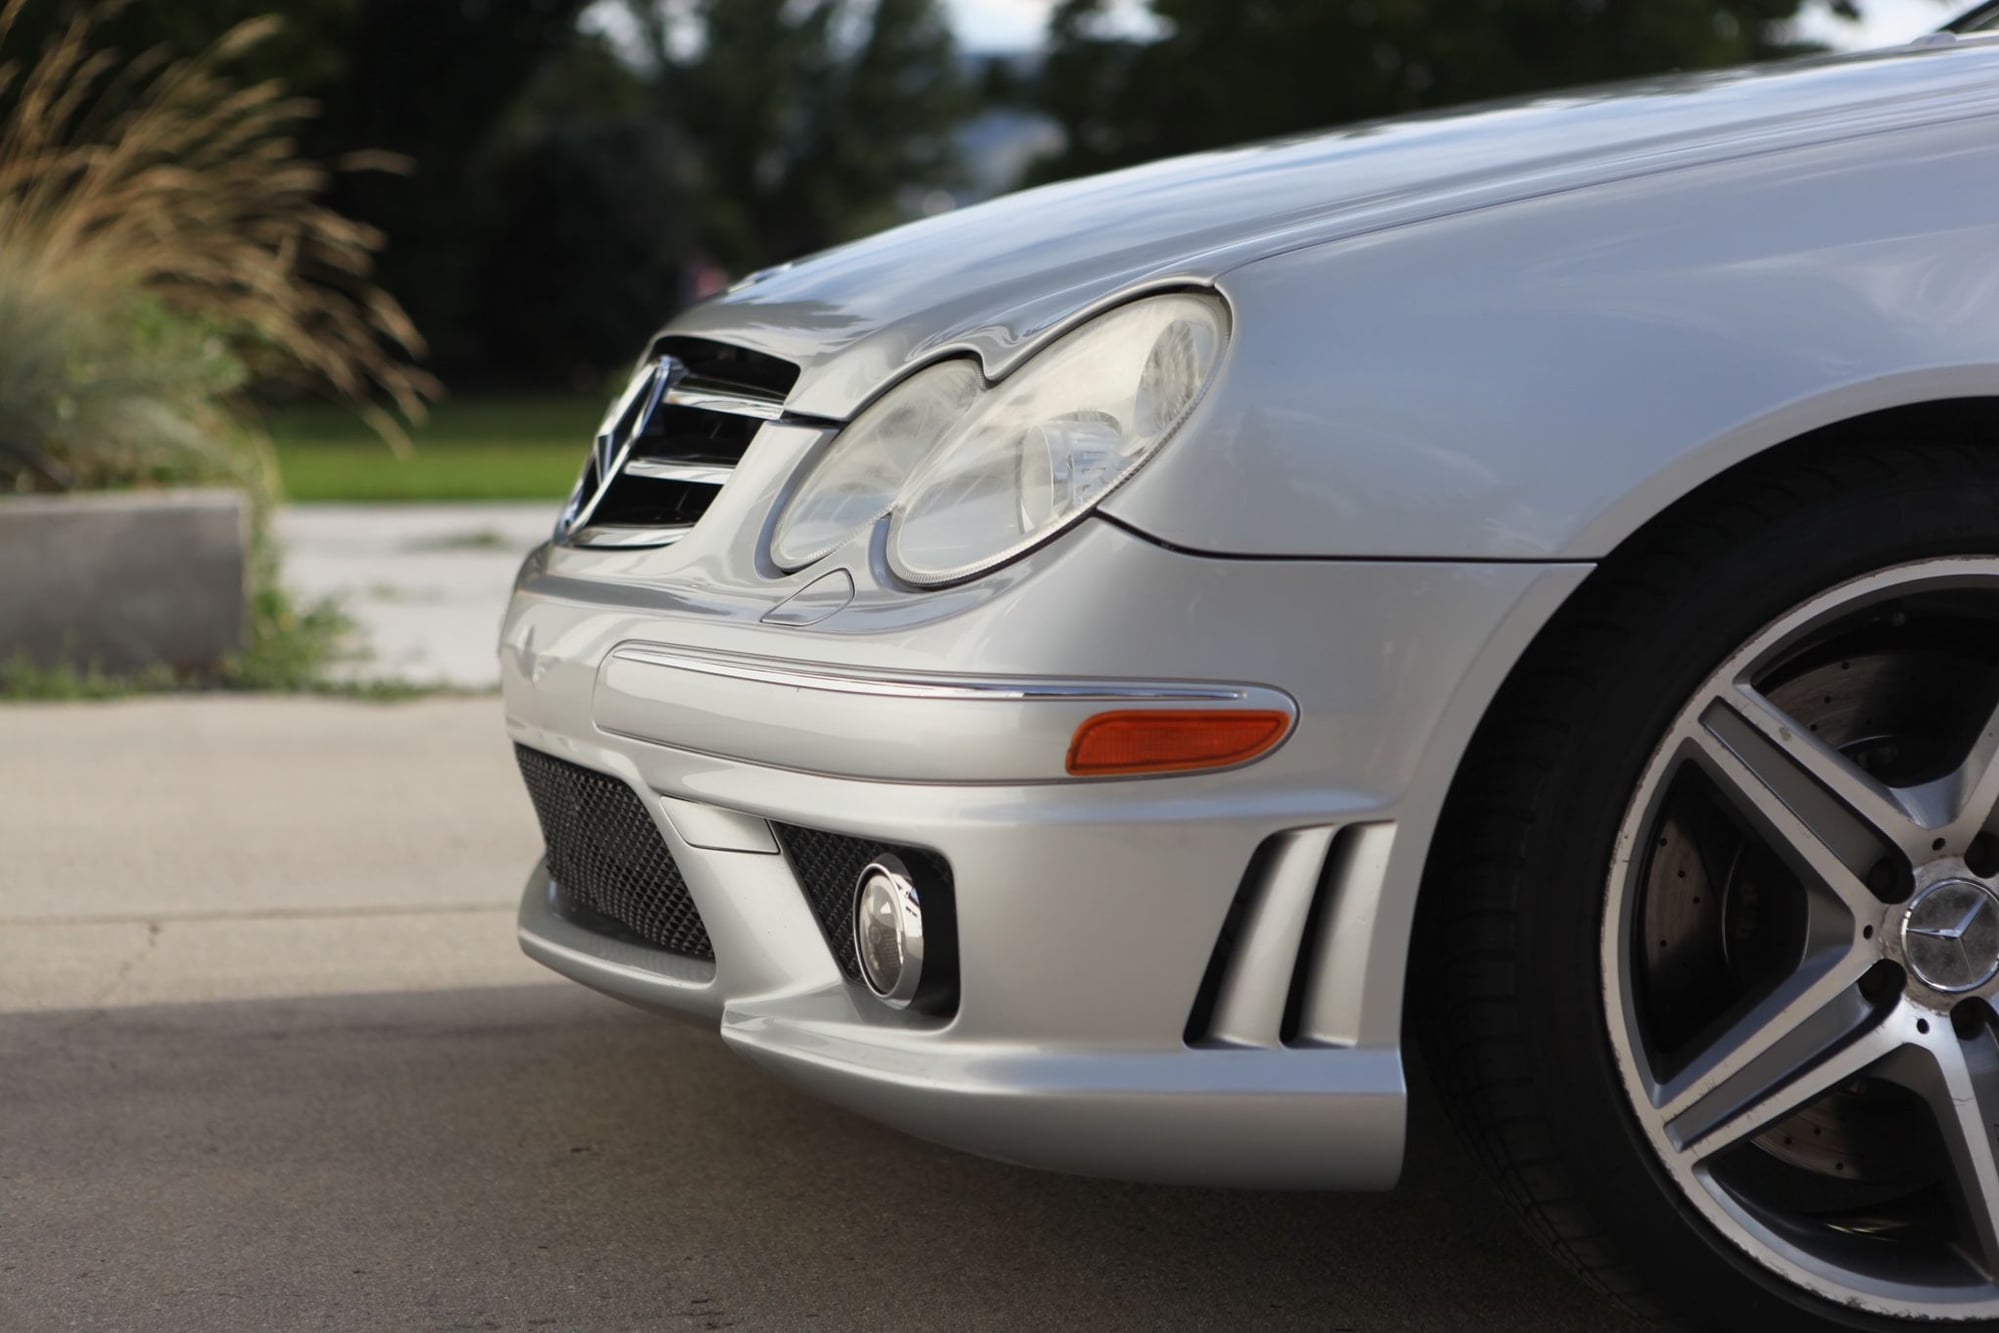 2007 Mercedes-Benz CLK63 AMG - FOR SALE :: 2007 CLK AMG Convertible - Used - VIN WDBTK77G77T076535 - 80,000 Miles - 8 cyl - 2WD - Automatic - Convertible - Silver - Sandy, UT 84092, United States